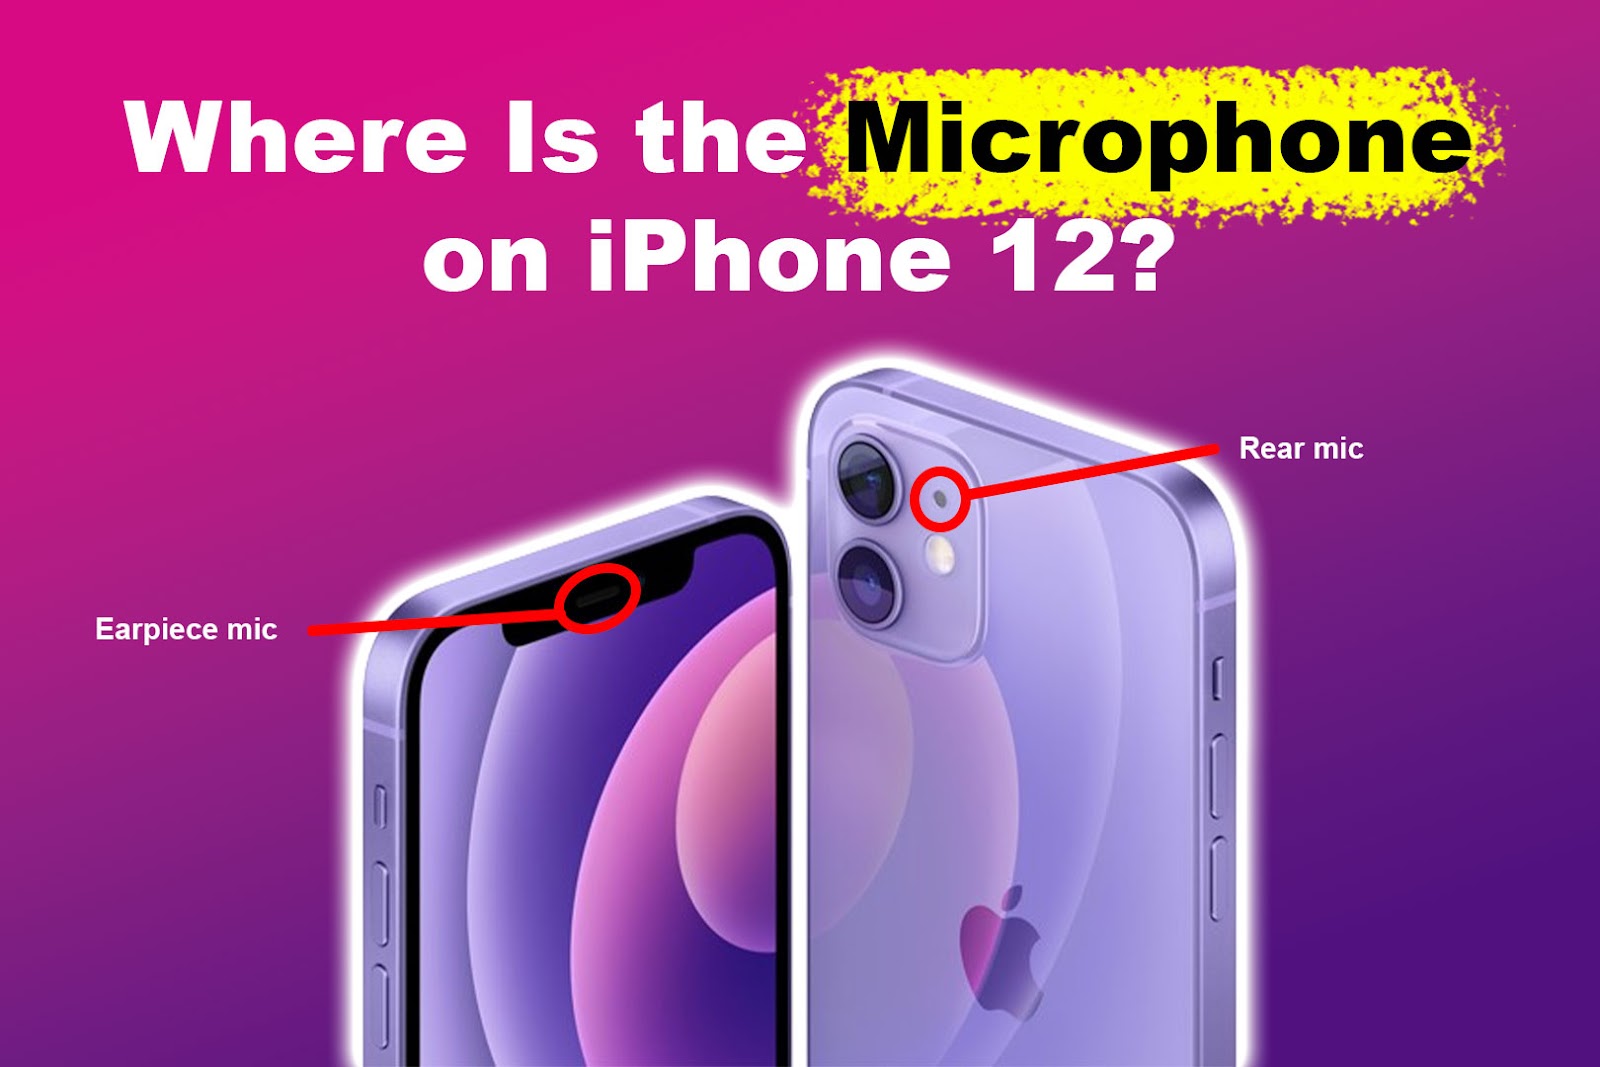 Where Is the Microphone on iPhone 12